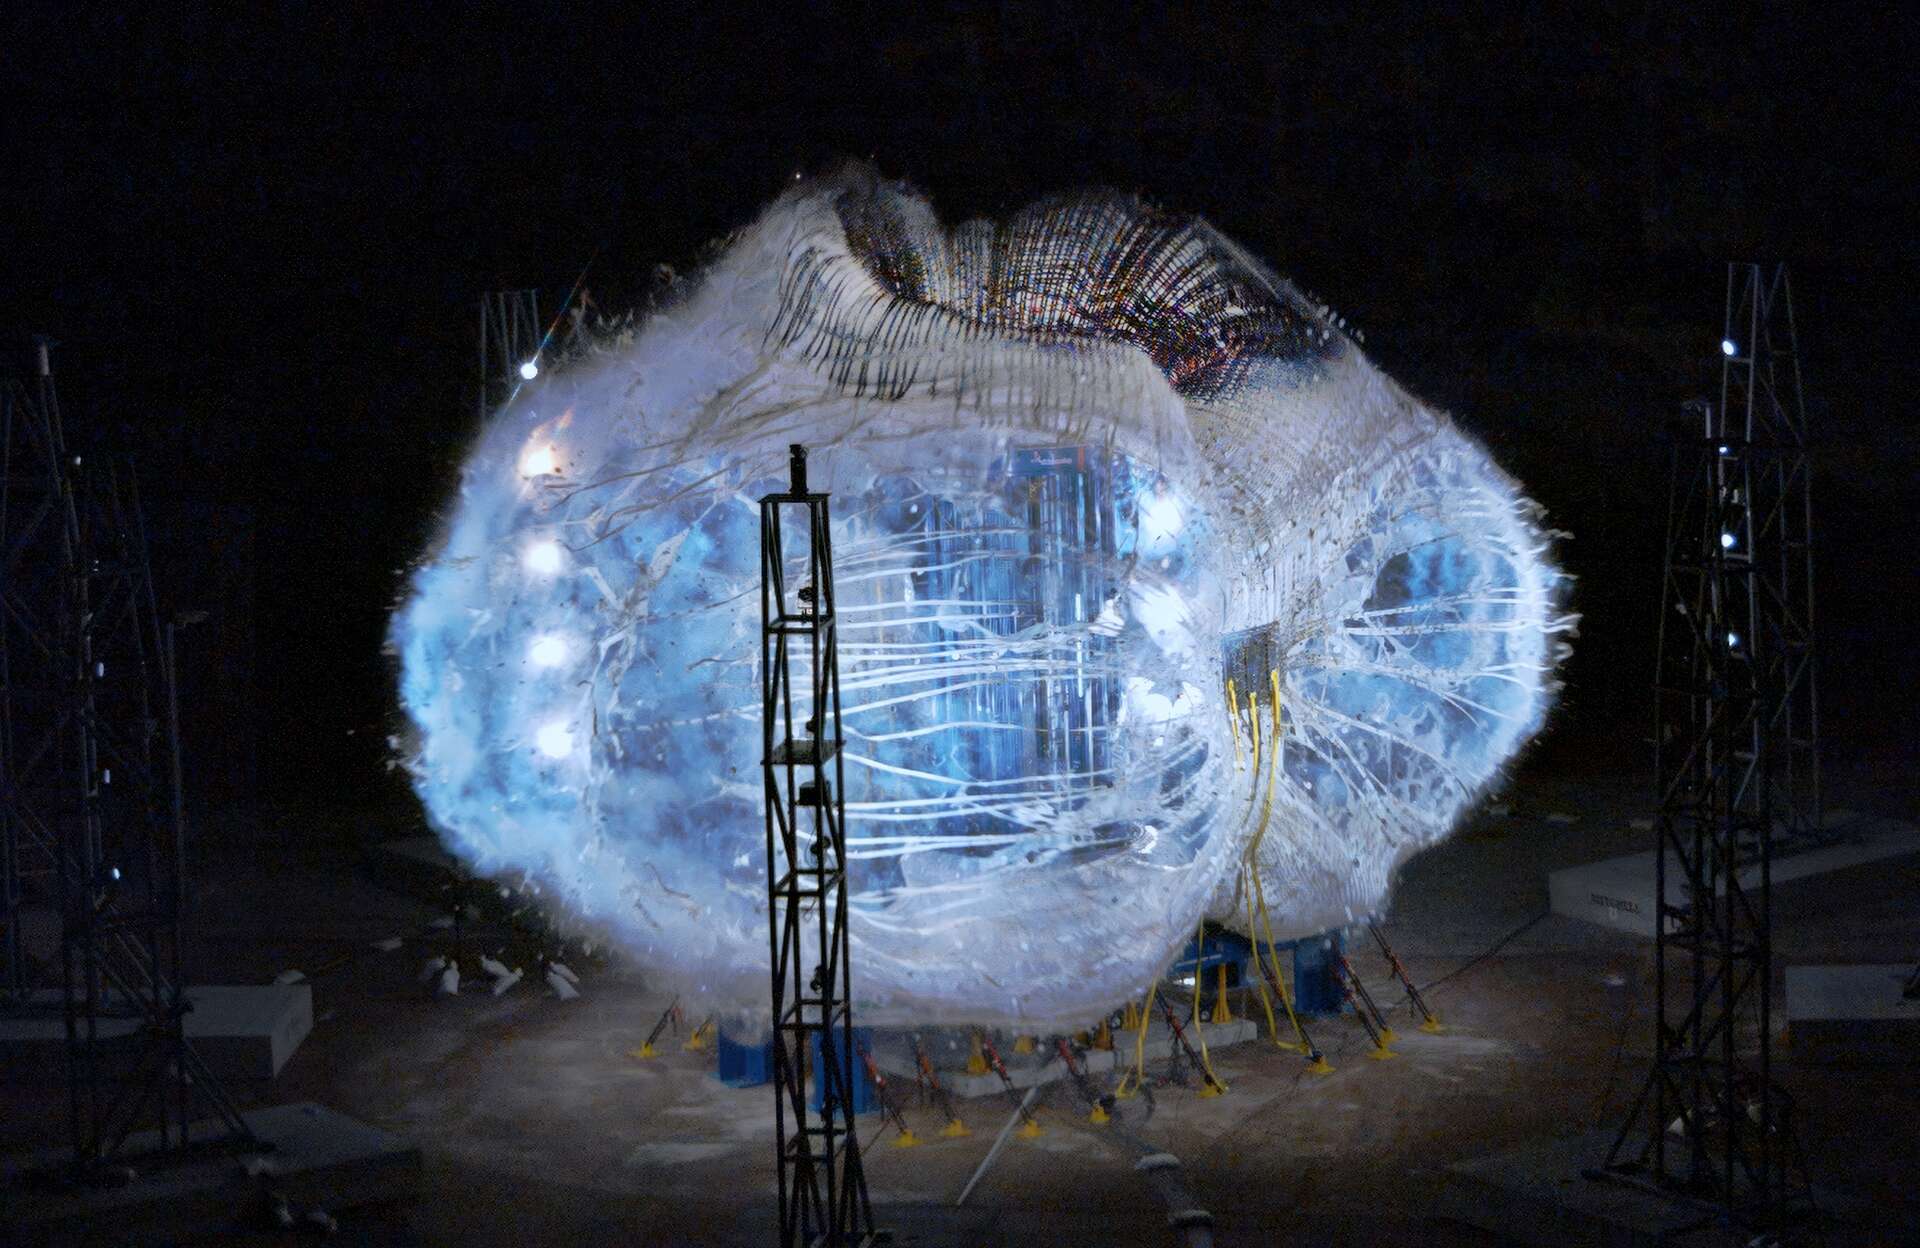 An amazing explosion of an inflatable prototype of a NASA space station